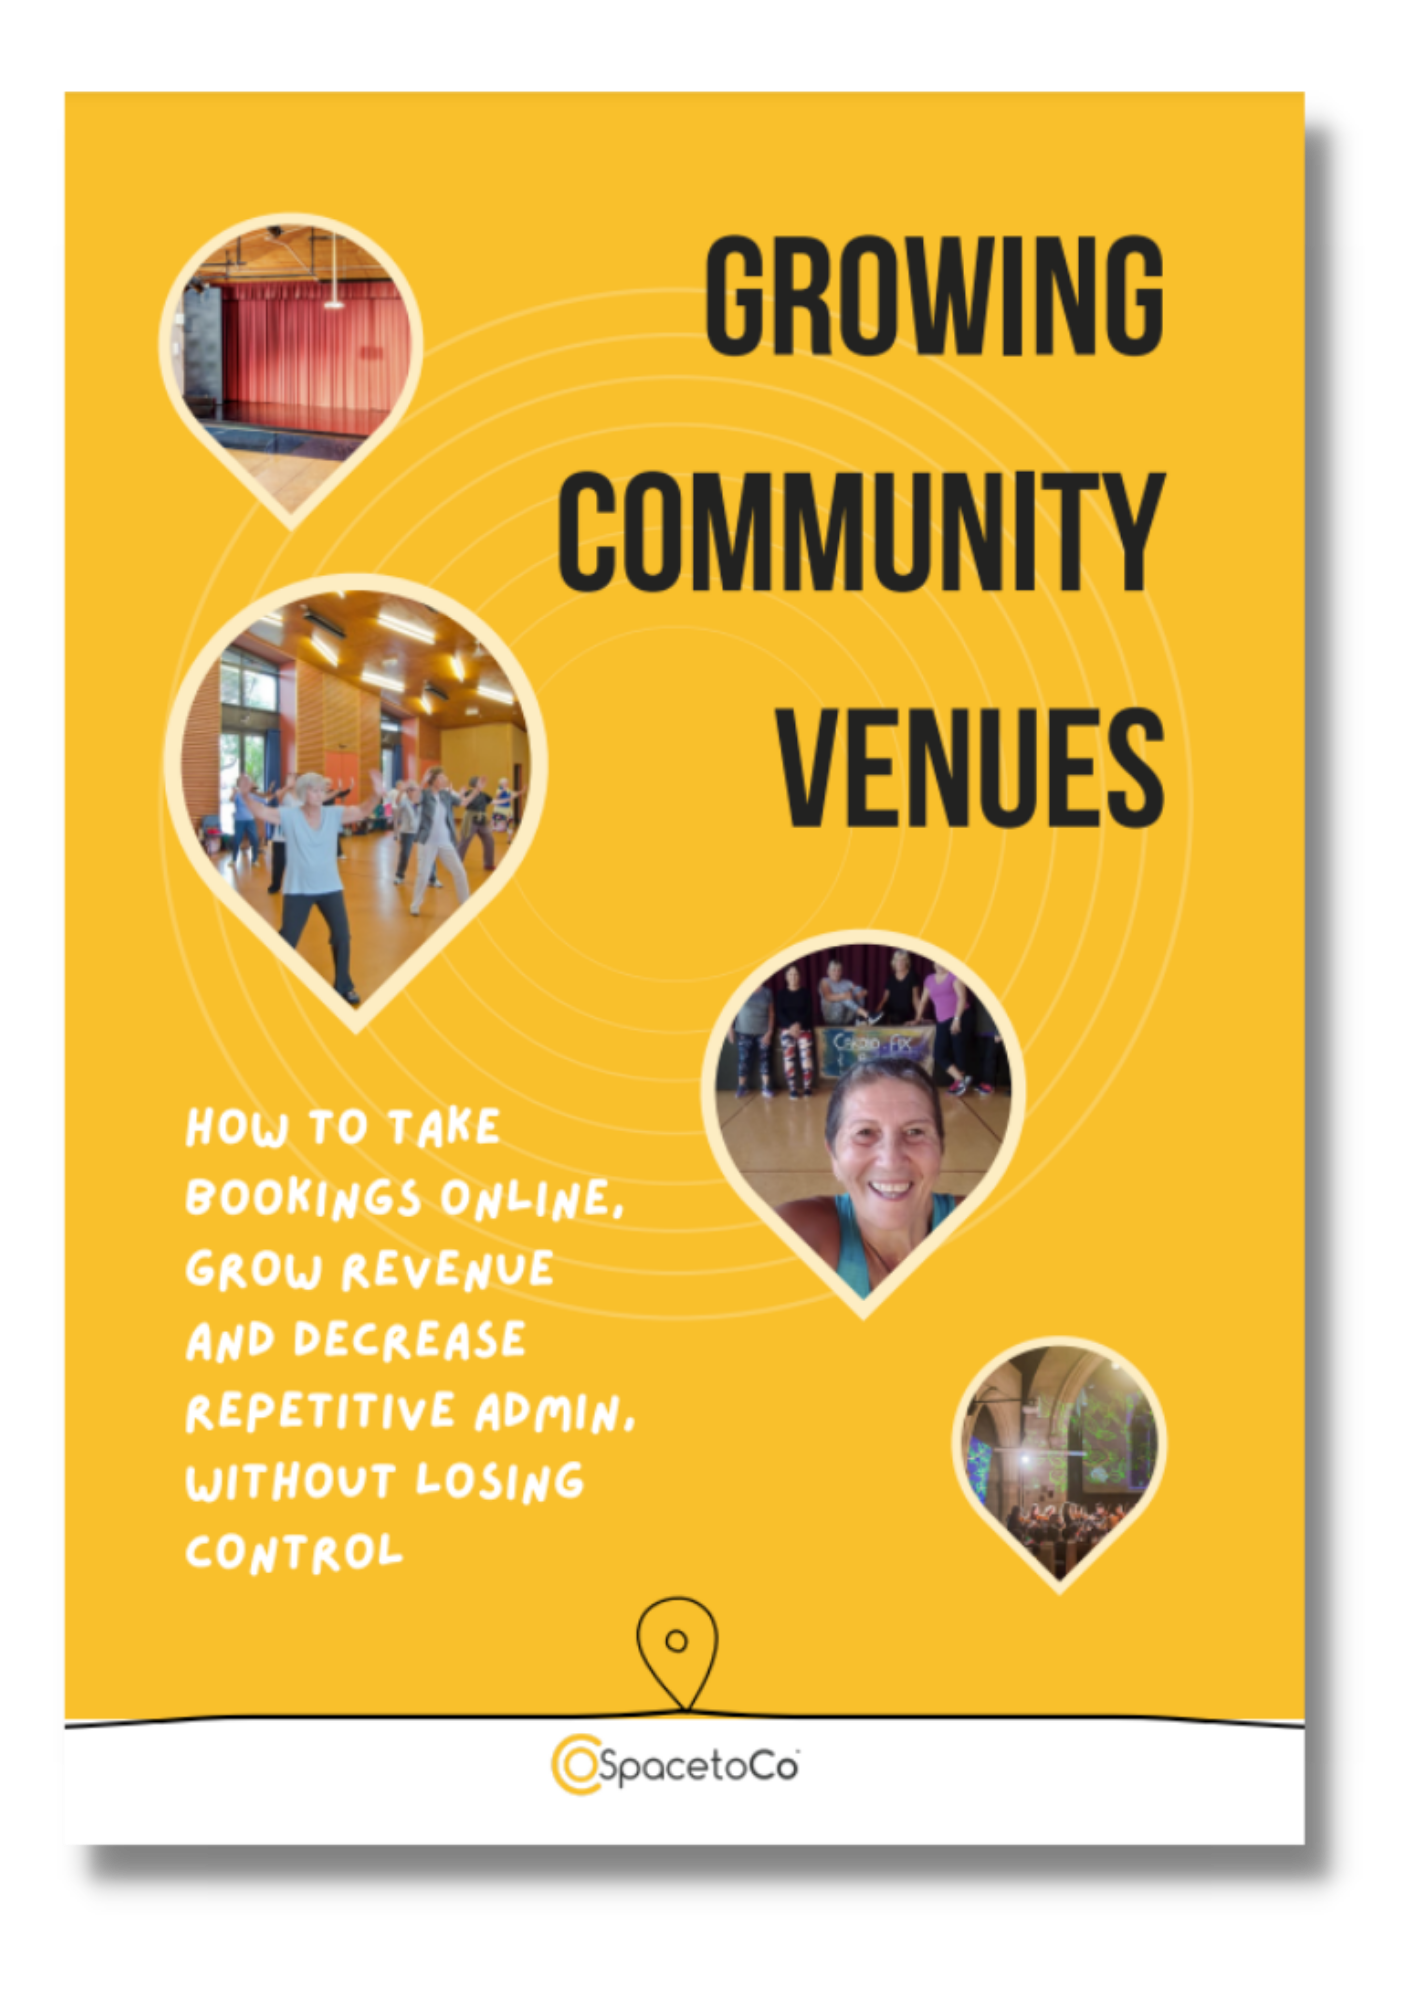 How to grow your community venue